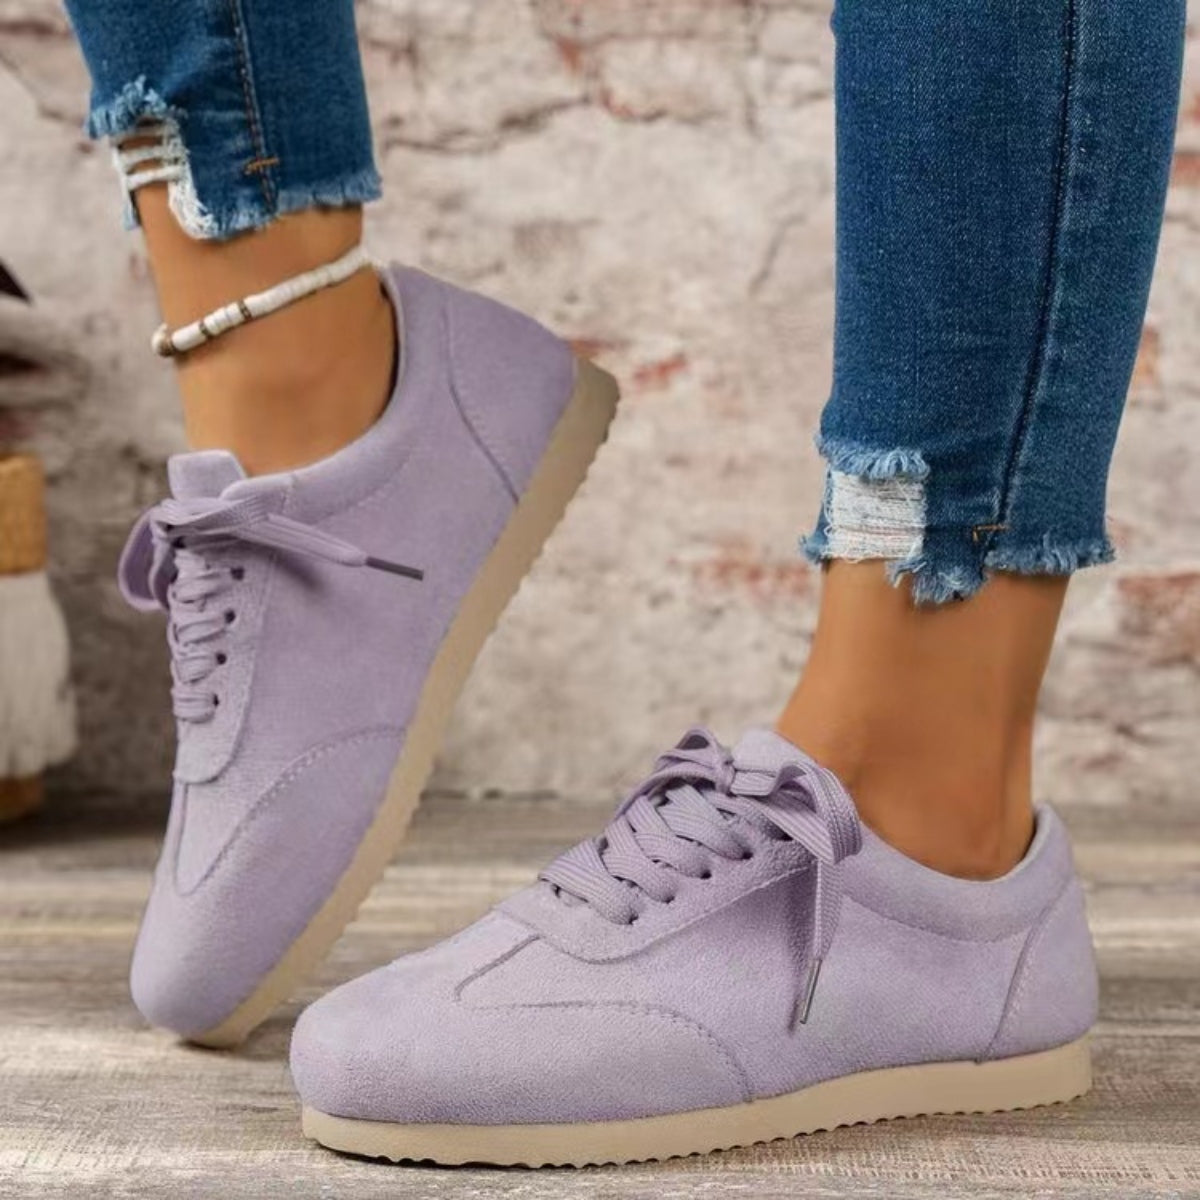 Suede Lace-Up Flat Sneakers